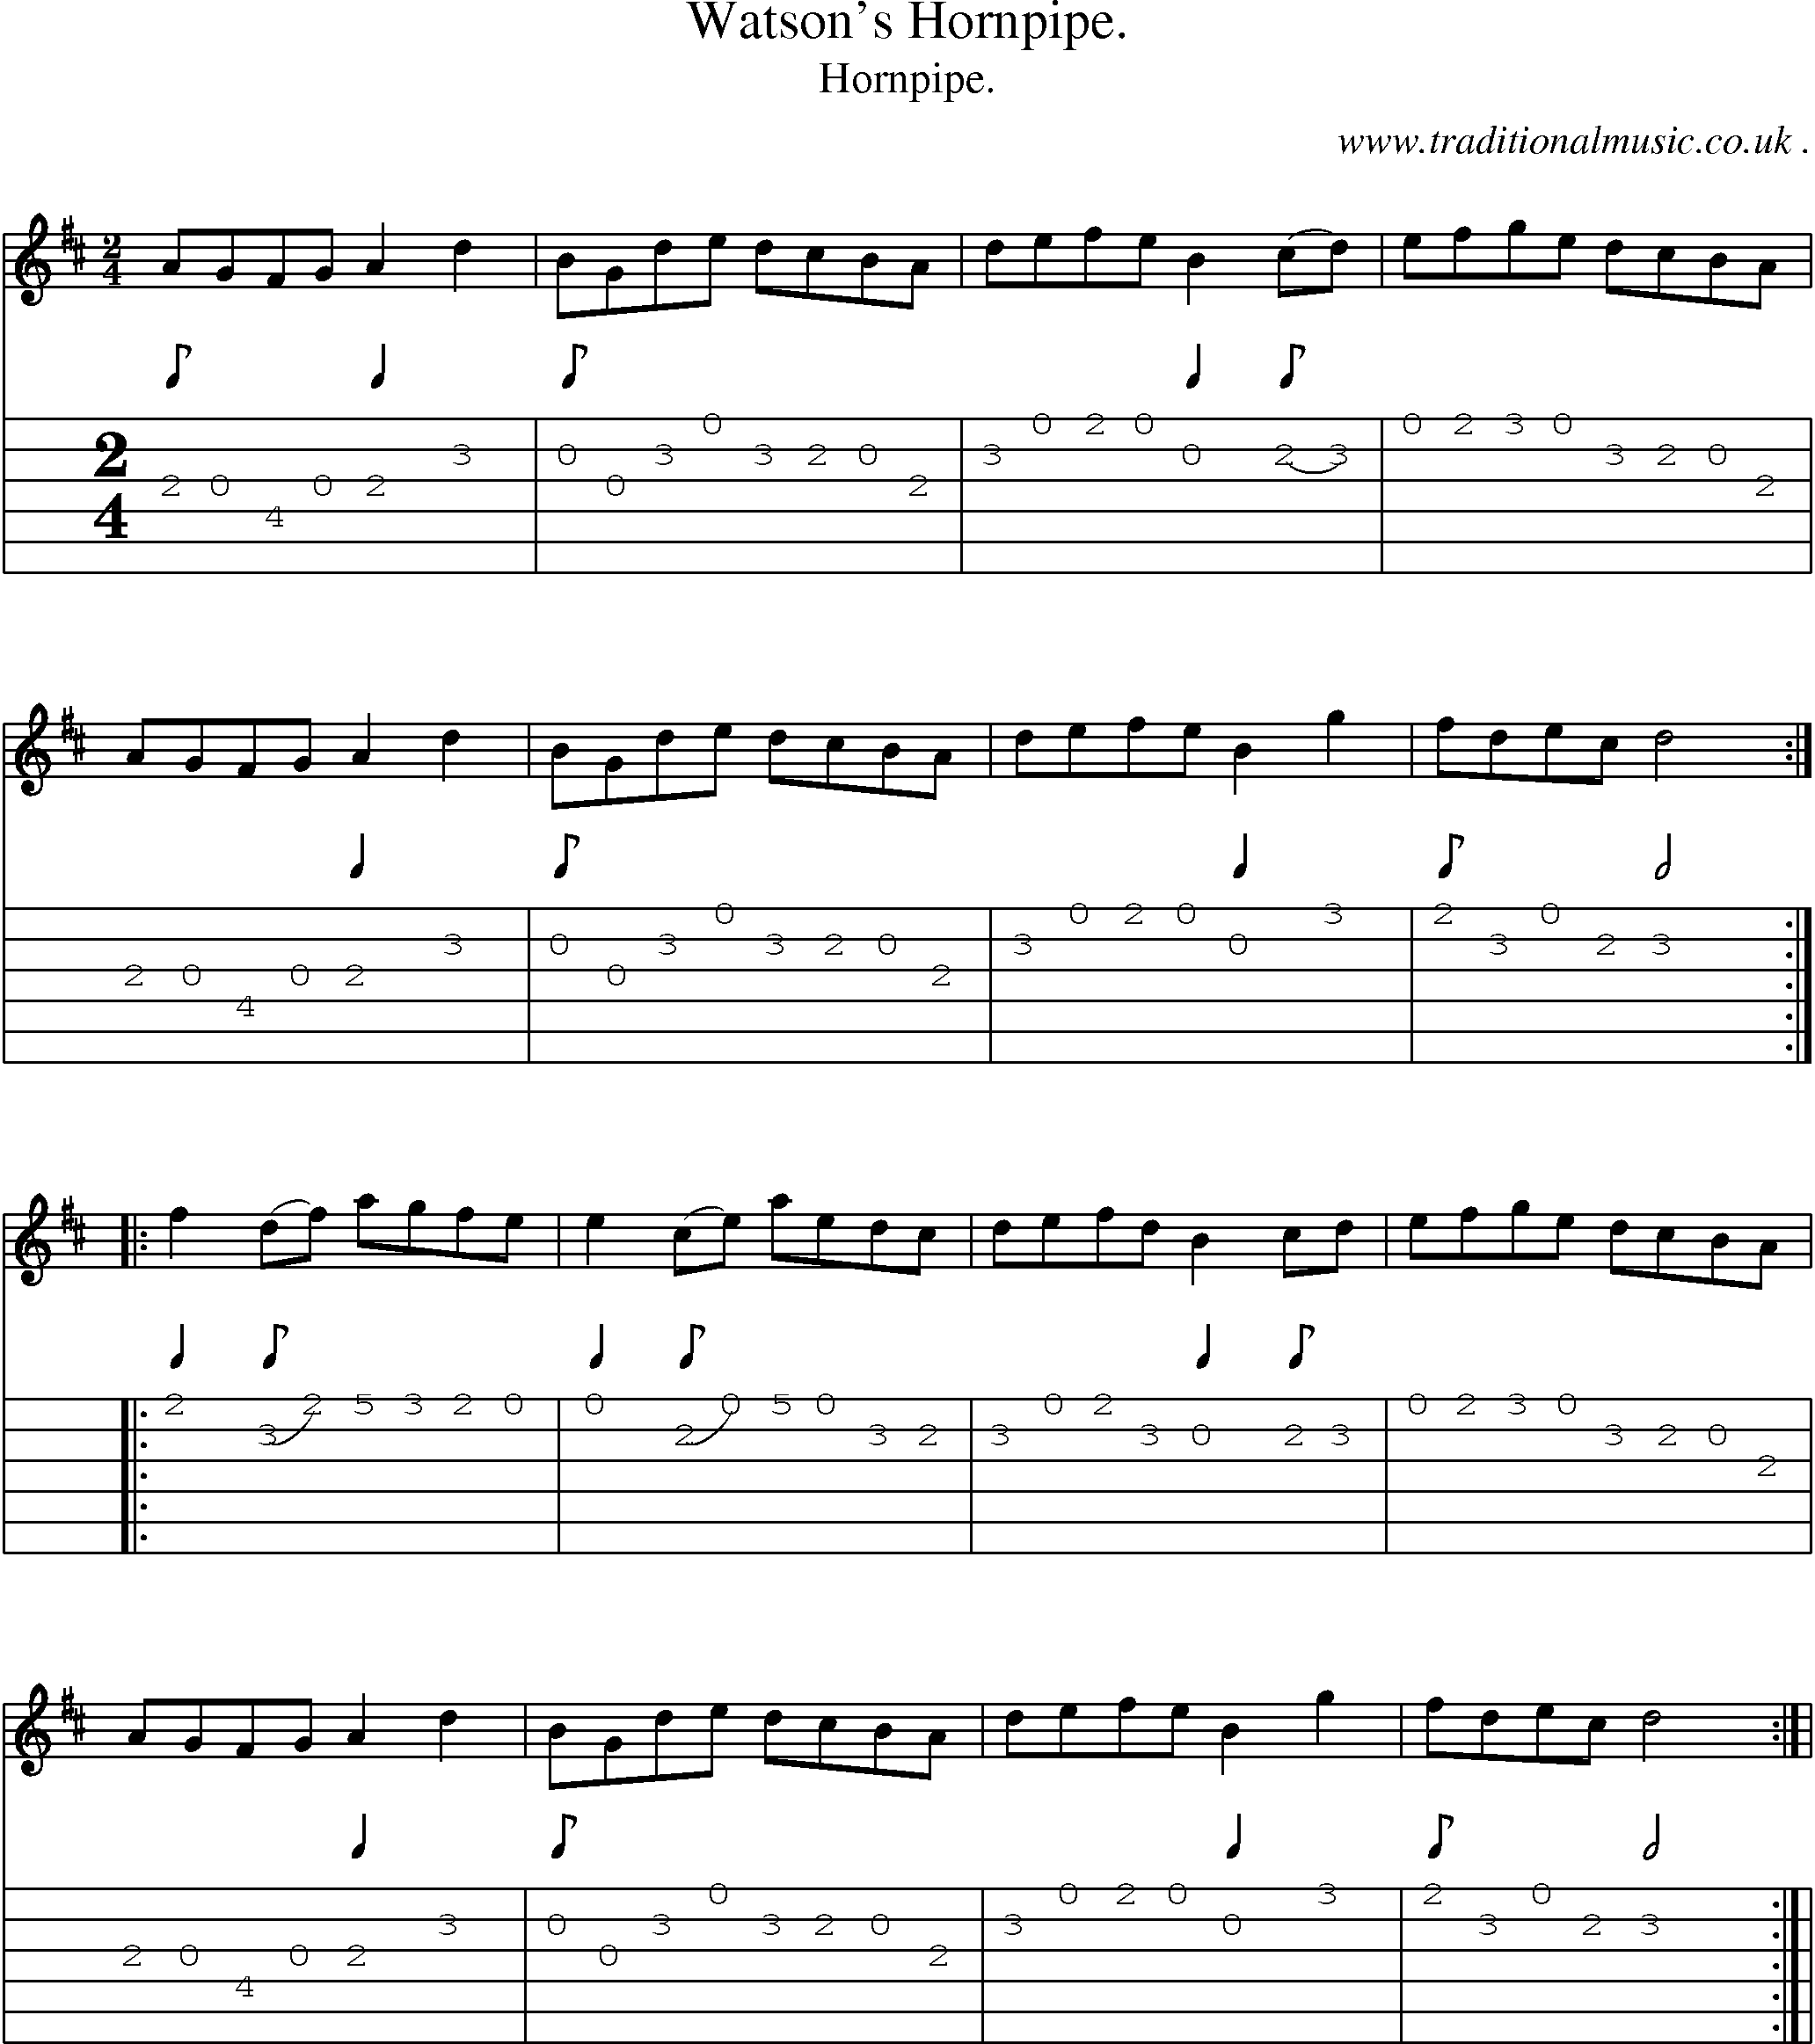 Sheet-Music and Guitar Tabs for Watsons Hornpipe